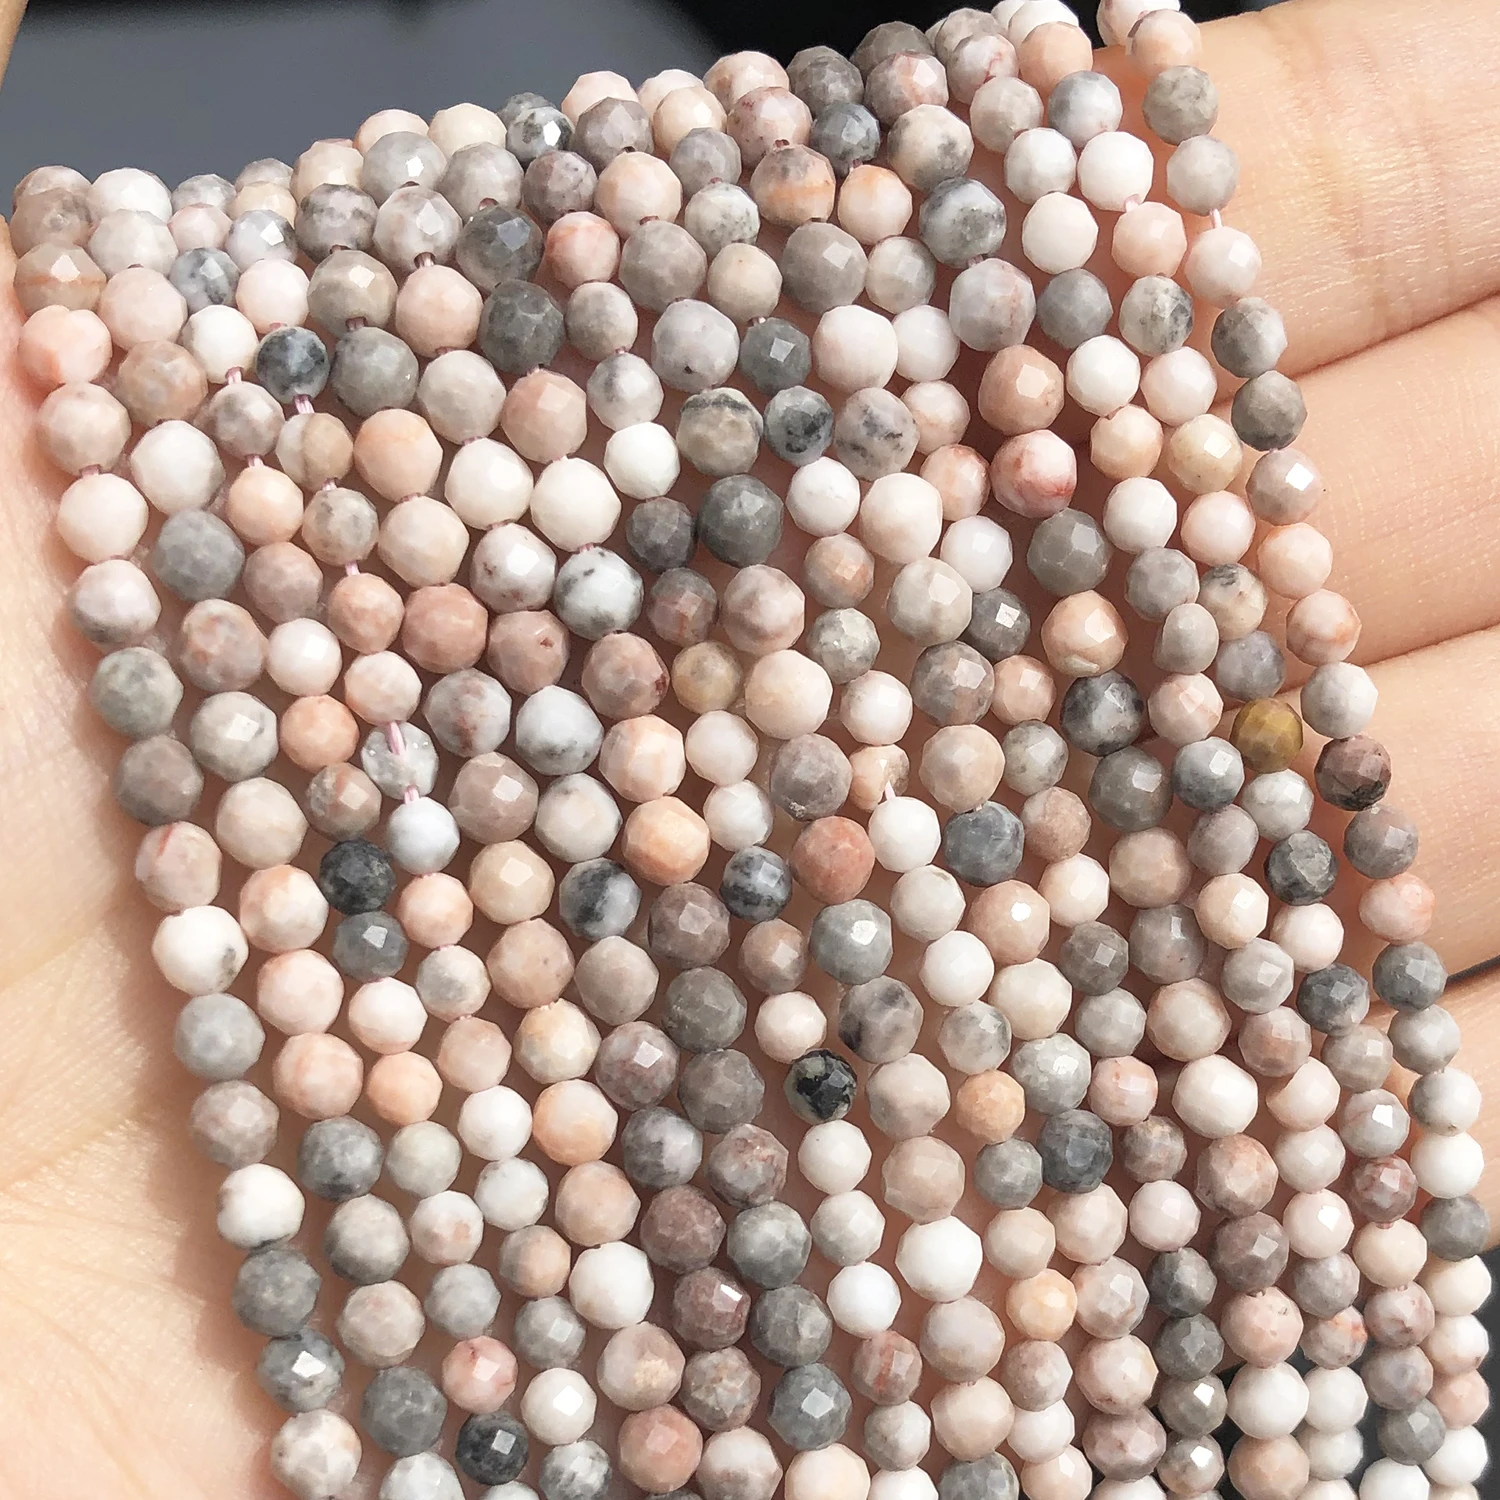 

Natural Stone Faceted Pink Zebra Jaspers Spacer Beads for Jewelry DIY 3 4mm Small Round Beads Making Bracelet Accessories 15''